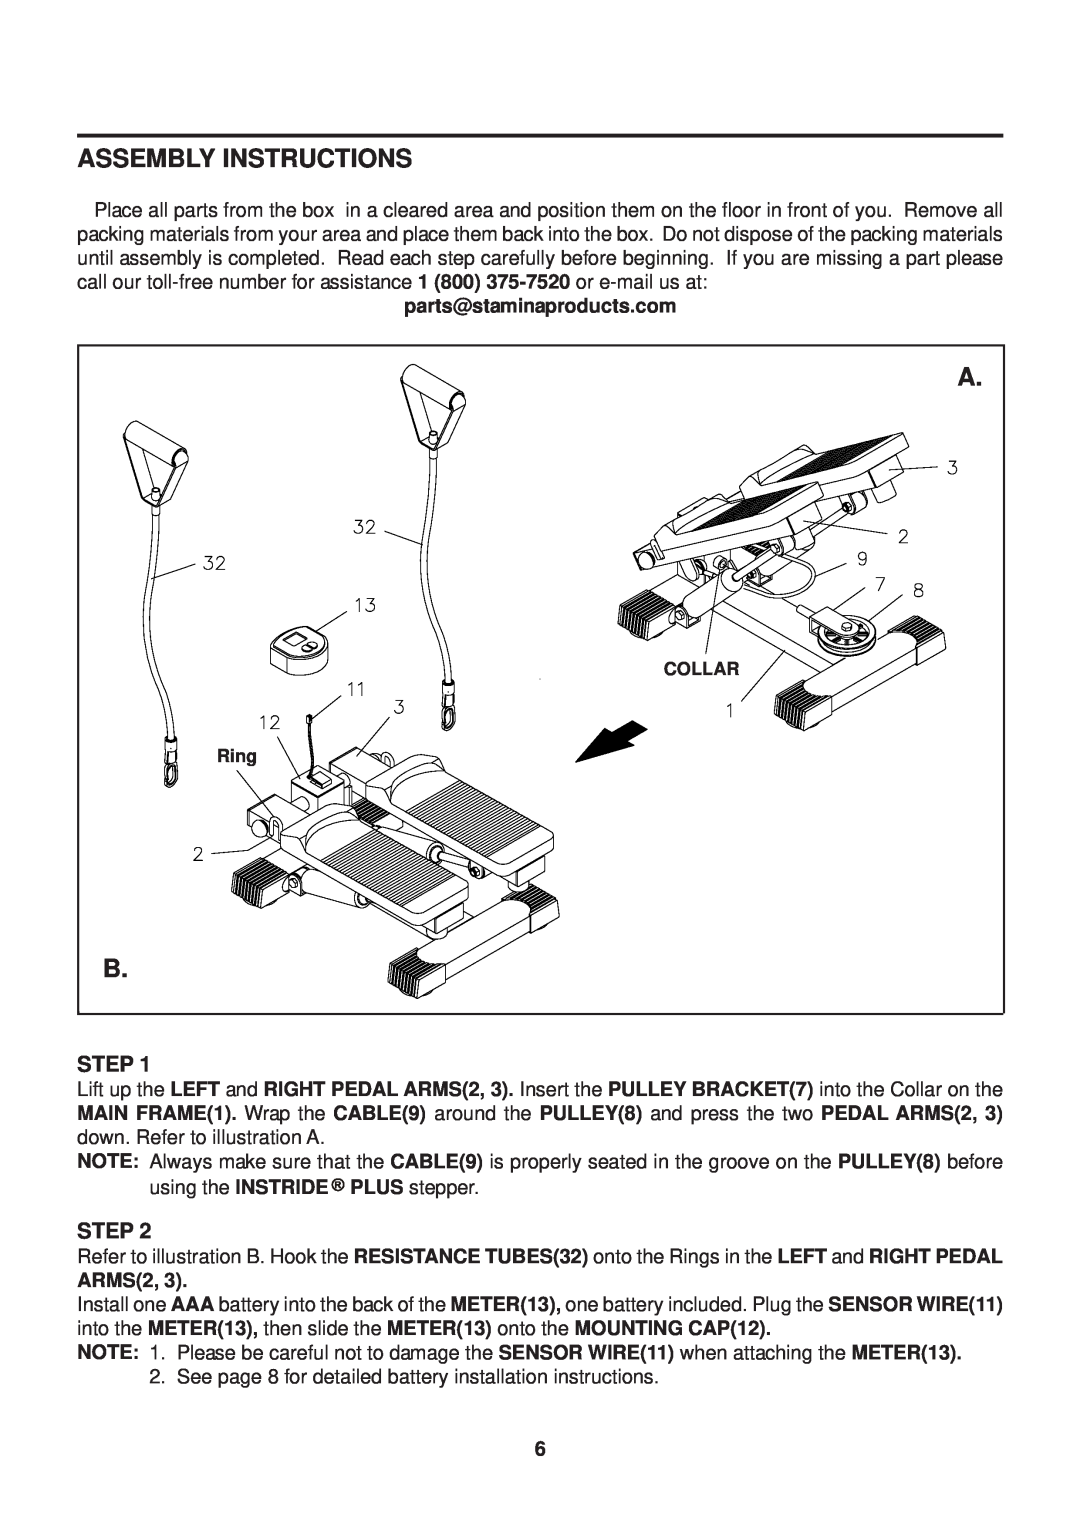 Stamina Products 40-0046A owner manual Assembly Instructions, Step, parts@staminaproducts.com, ARMS2 